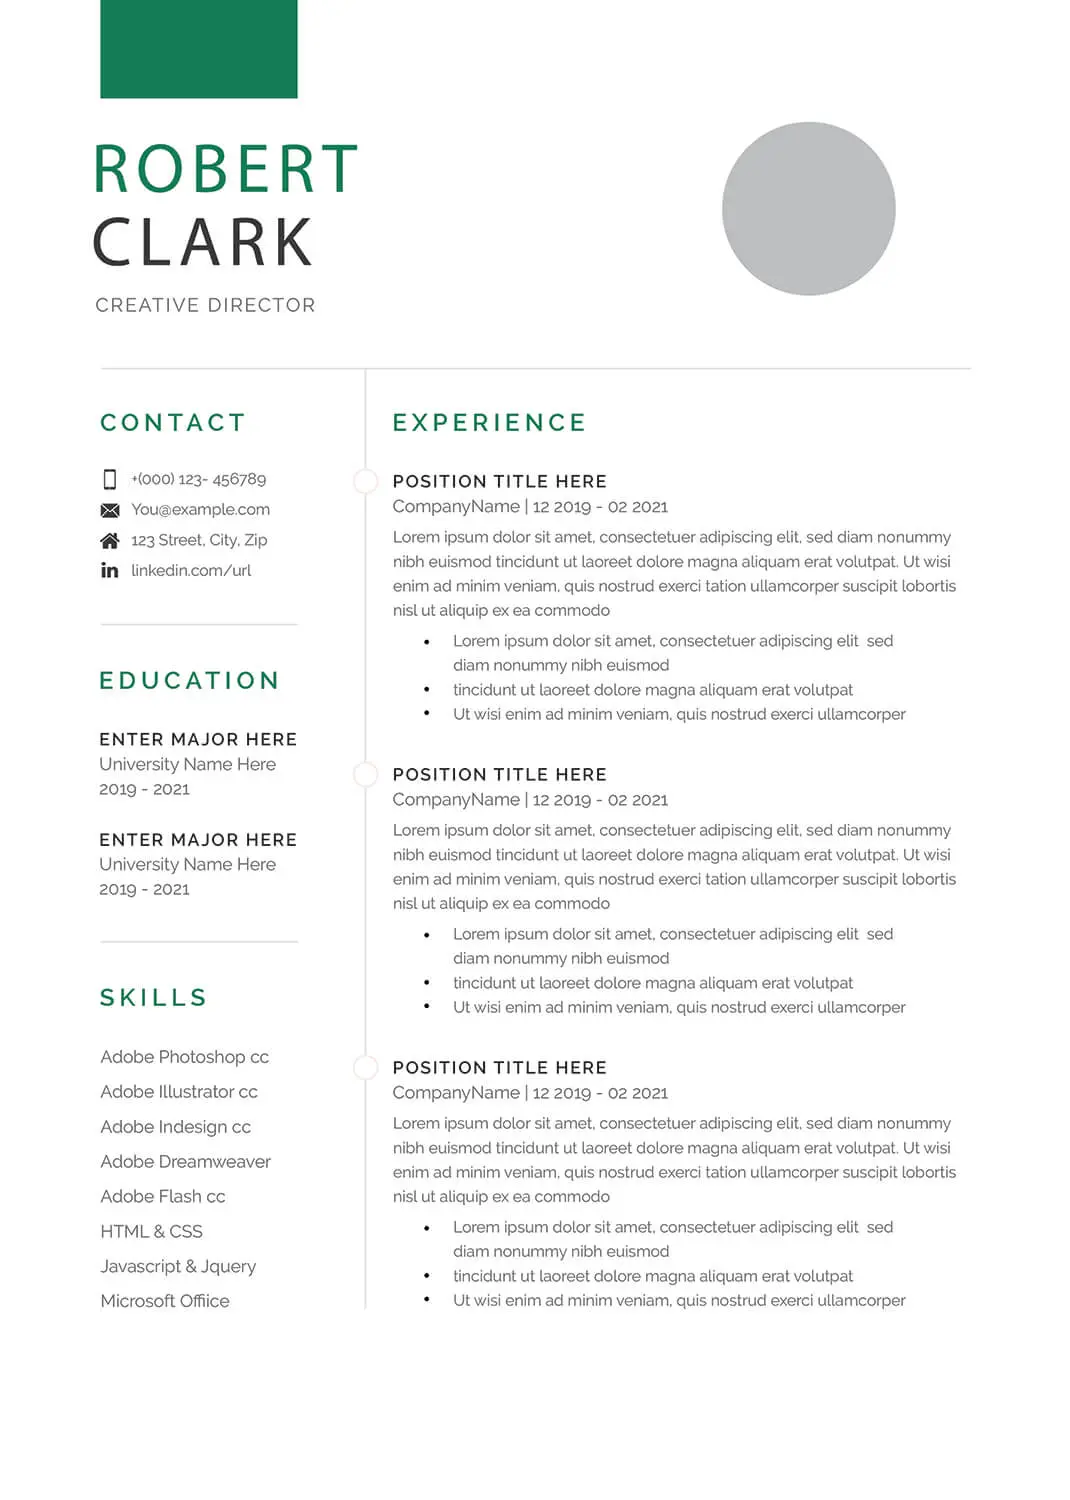 Data Entry Specialist Resume Templates